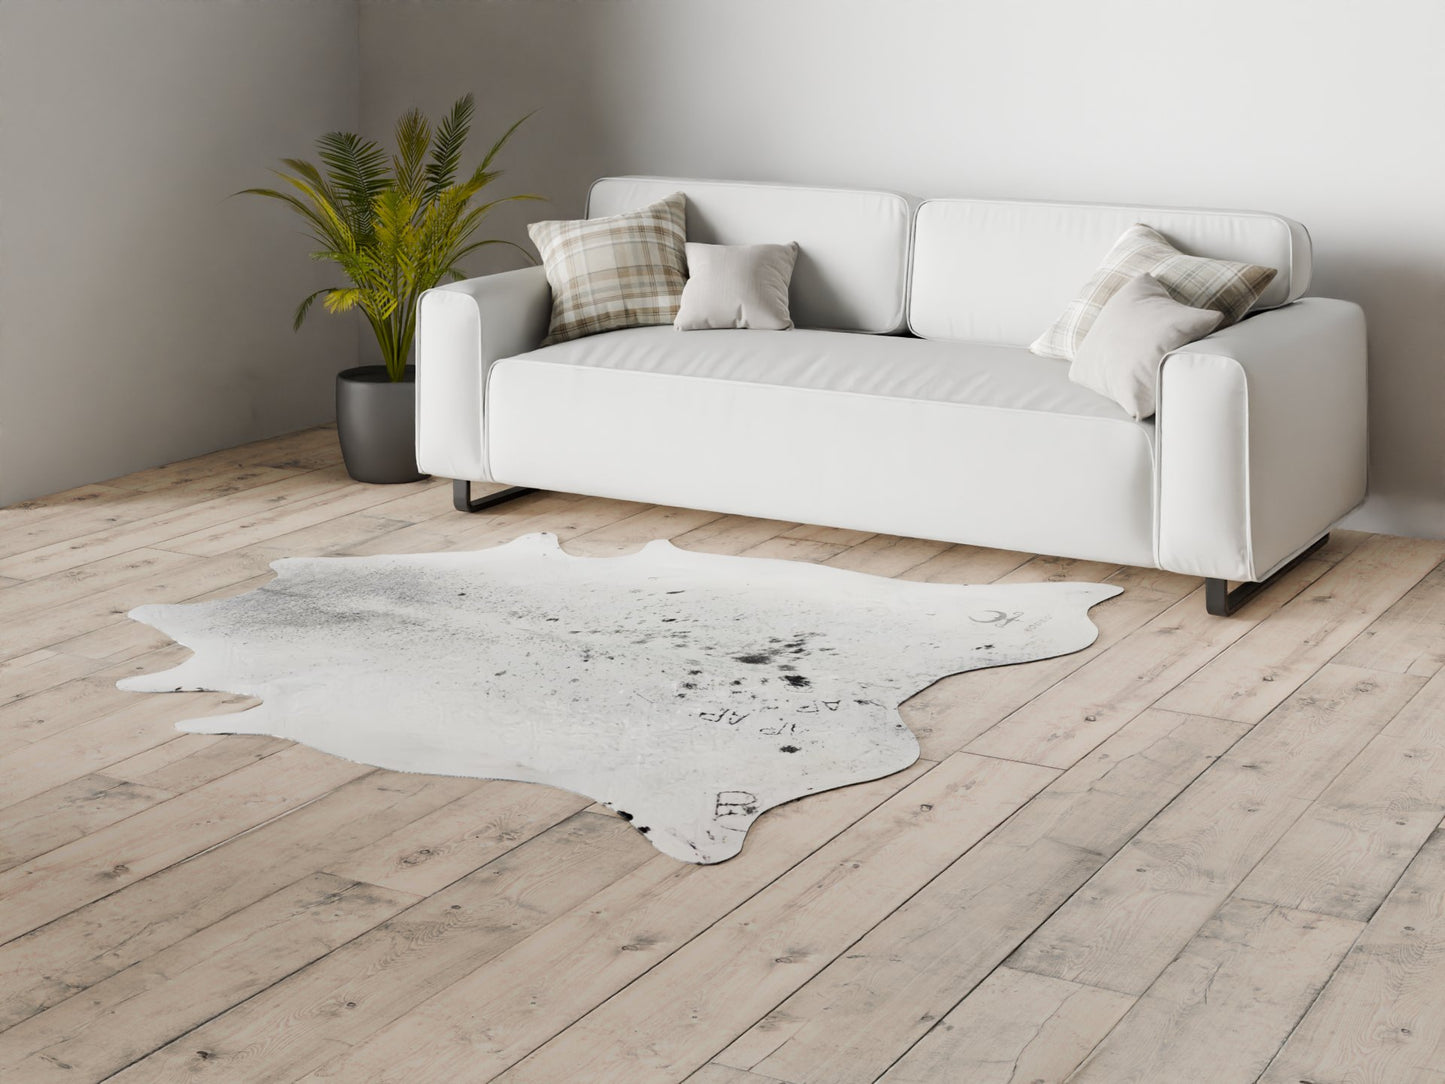 Salt and Pepper Cowhide Rug Size 6x7 ft---4664 - Rodeo Cowhide Rugs